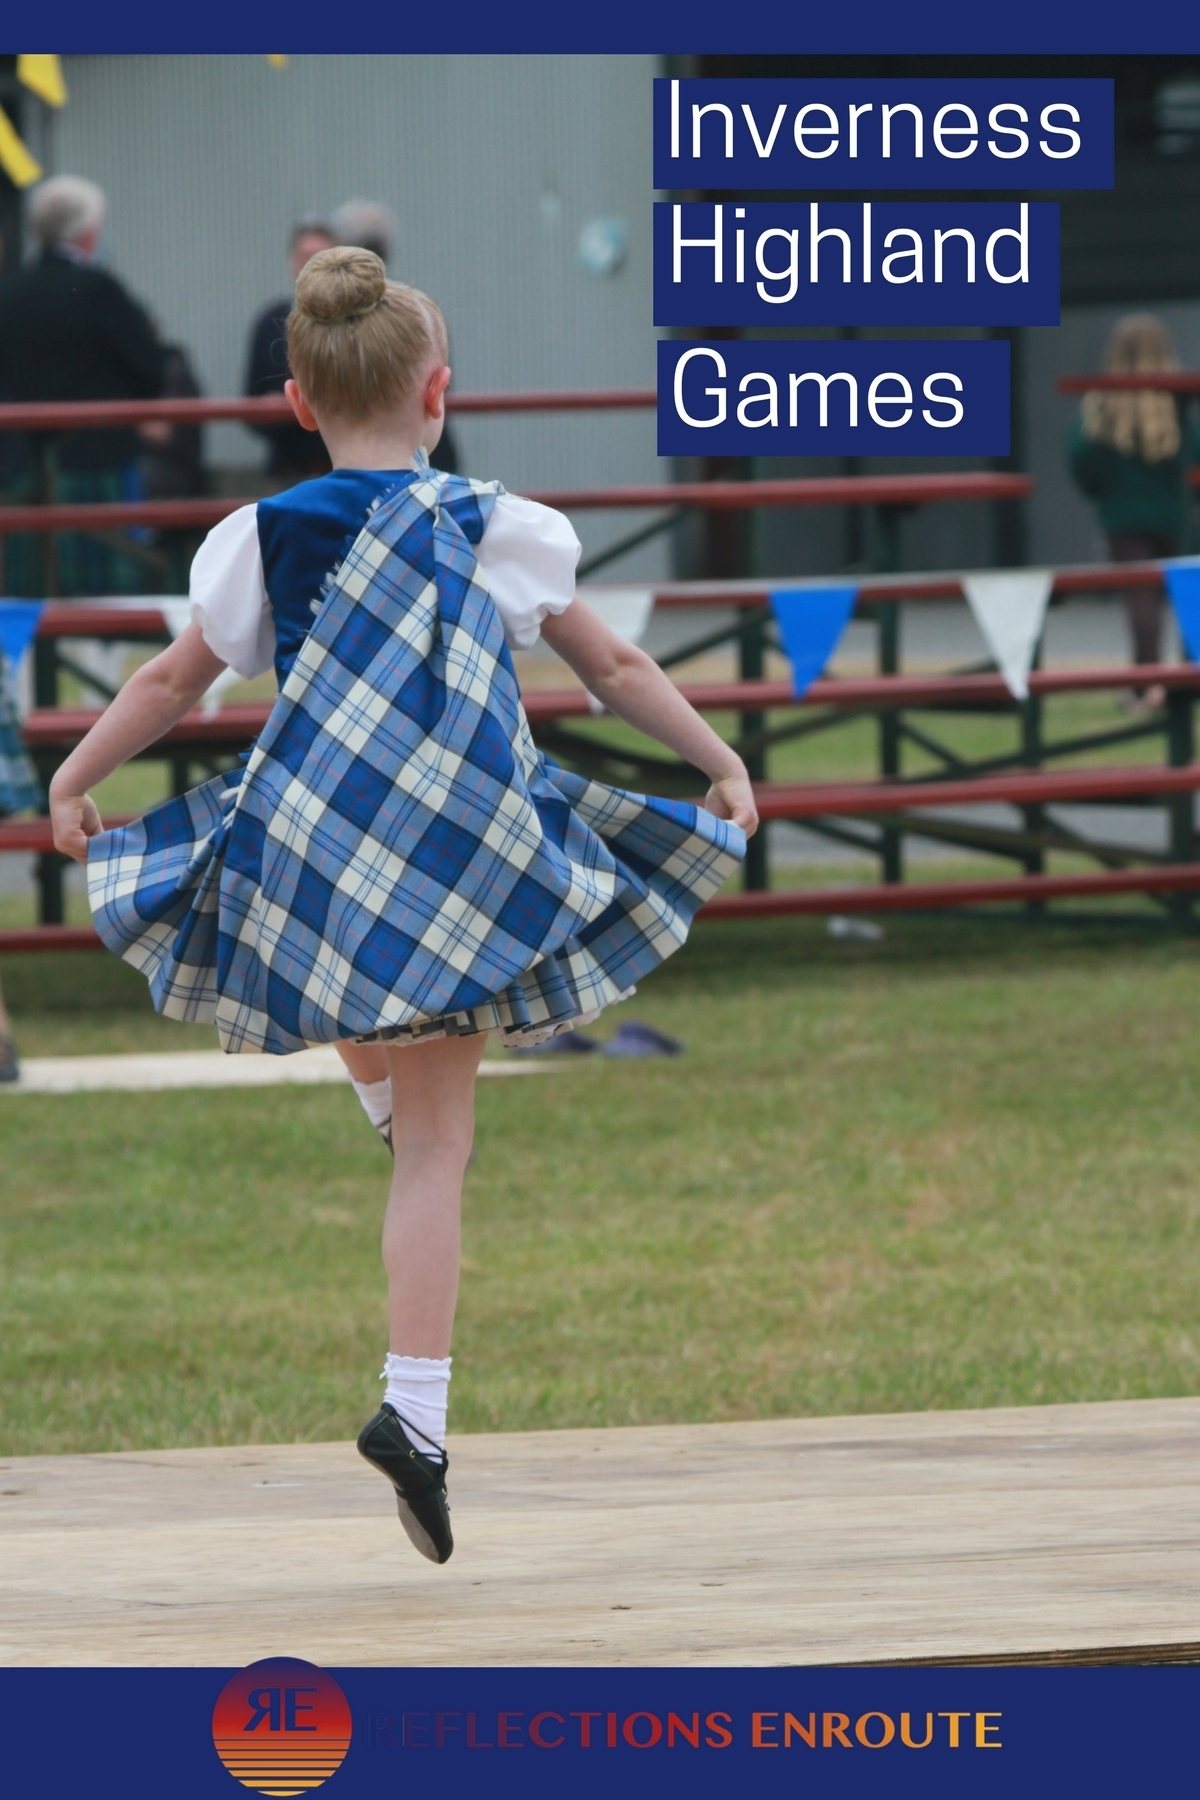 Grab your kilt and head off to the Inverness Highland Games to root for your clan.